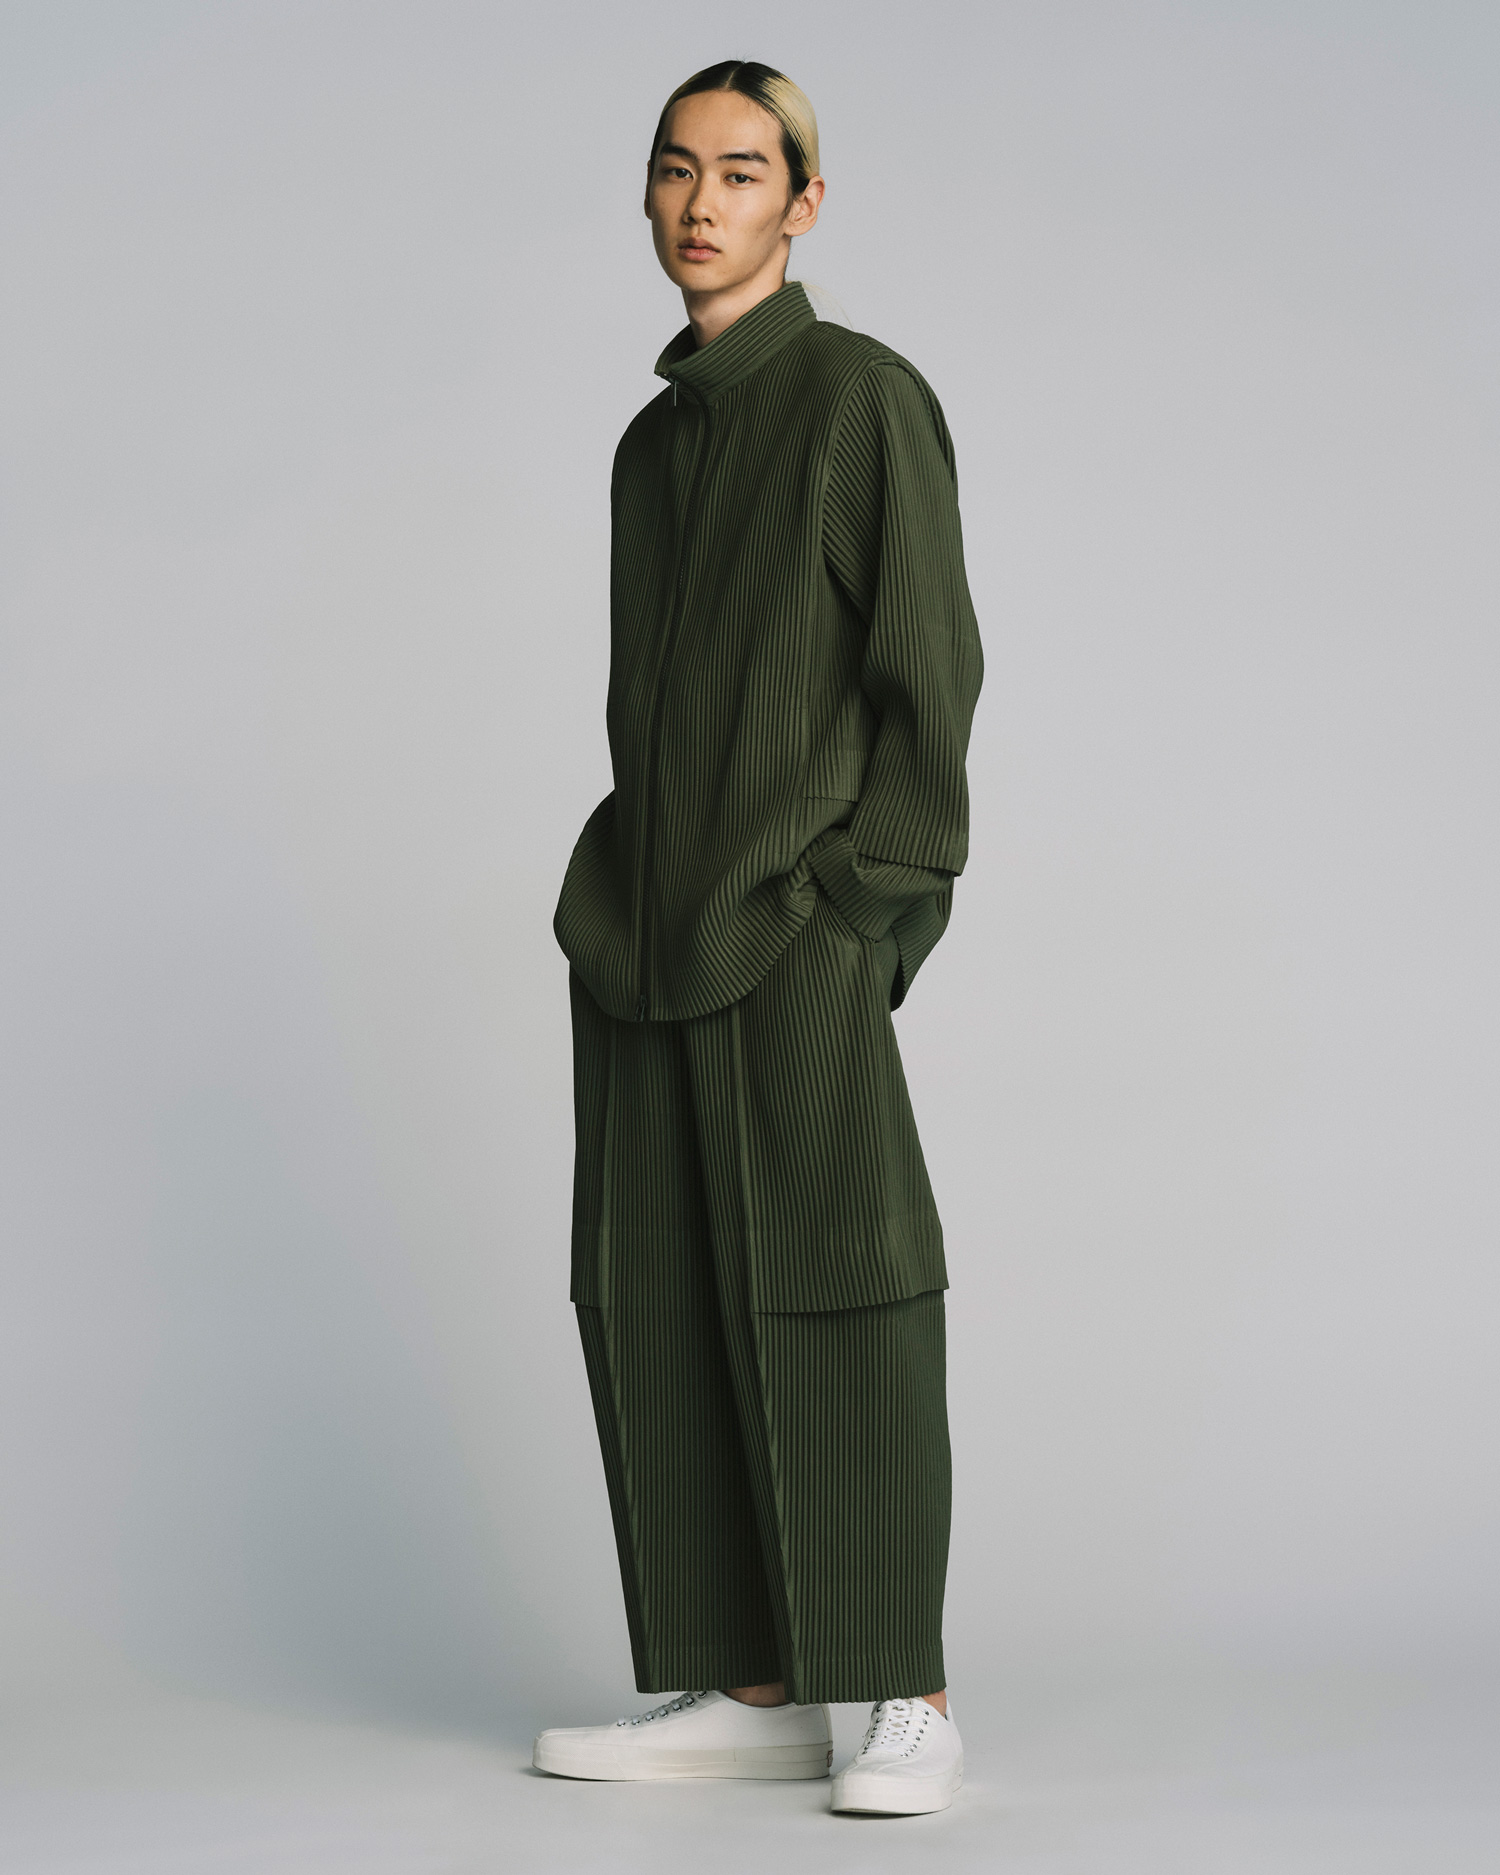 ISSEY MIYAKE HOMME PLISSÉ Debuts Fall/Winter 2022 Collection - V